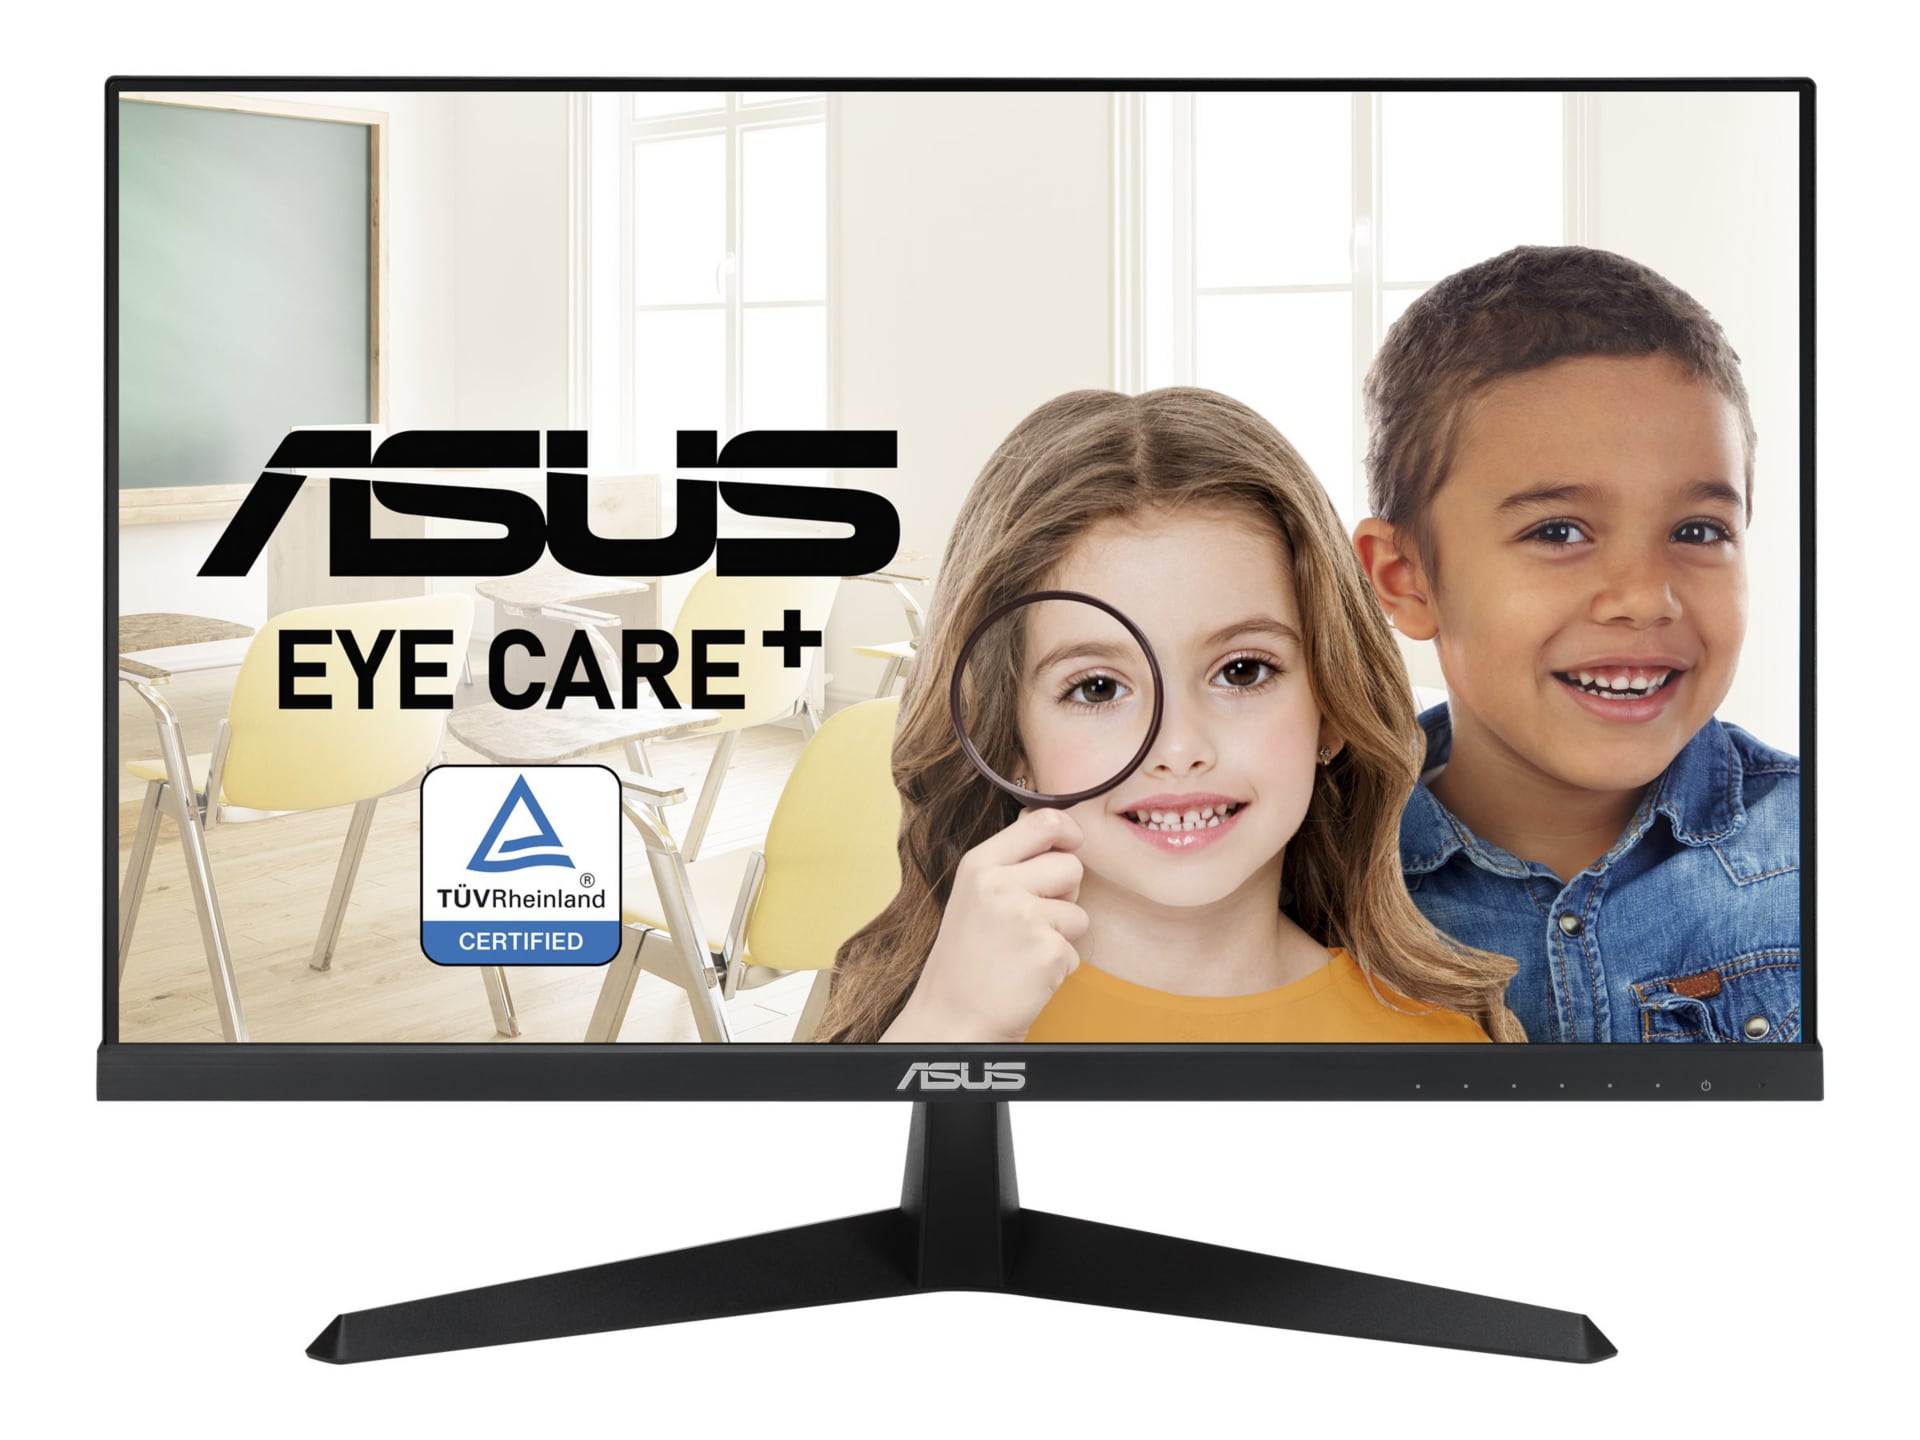 ASUS VY249HE 23.8” Eye Care Monitor - 1080P - Full HD - 75Hz - IPS